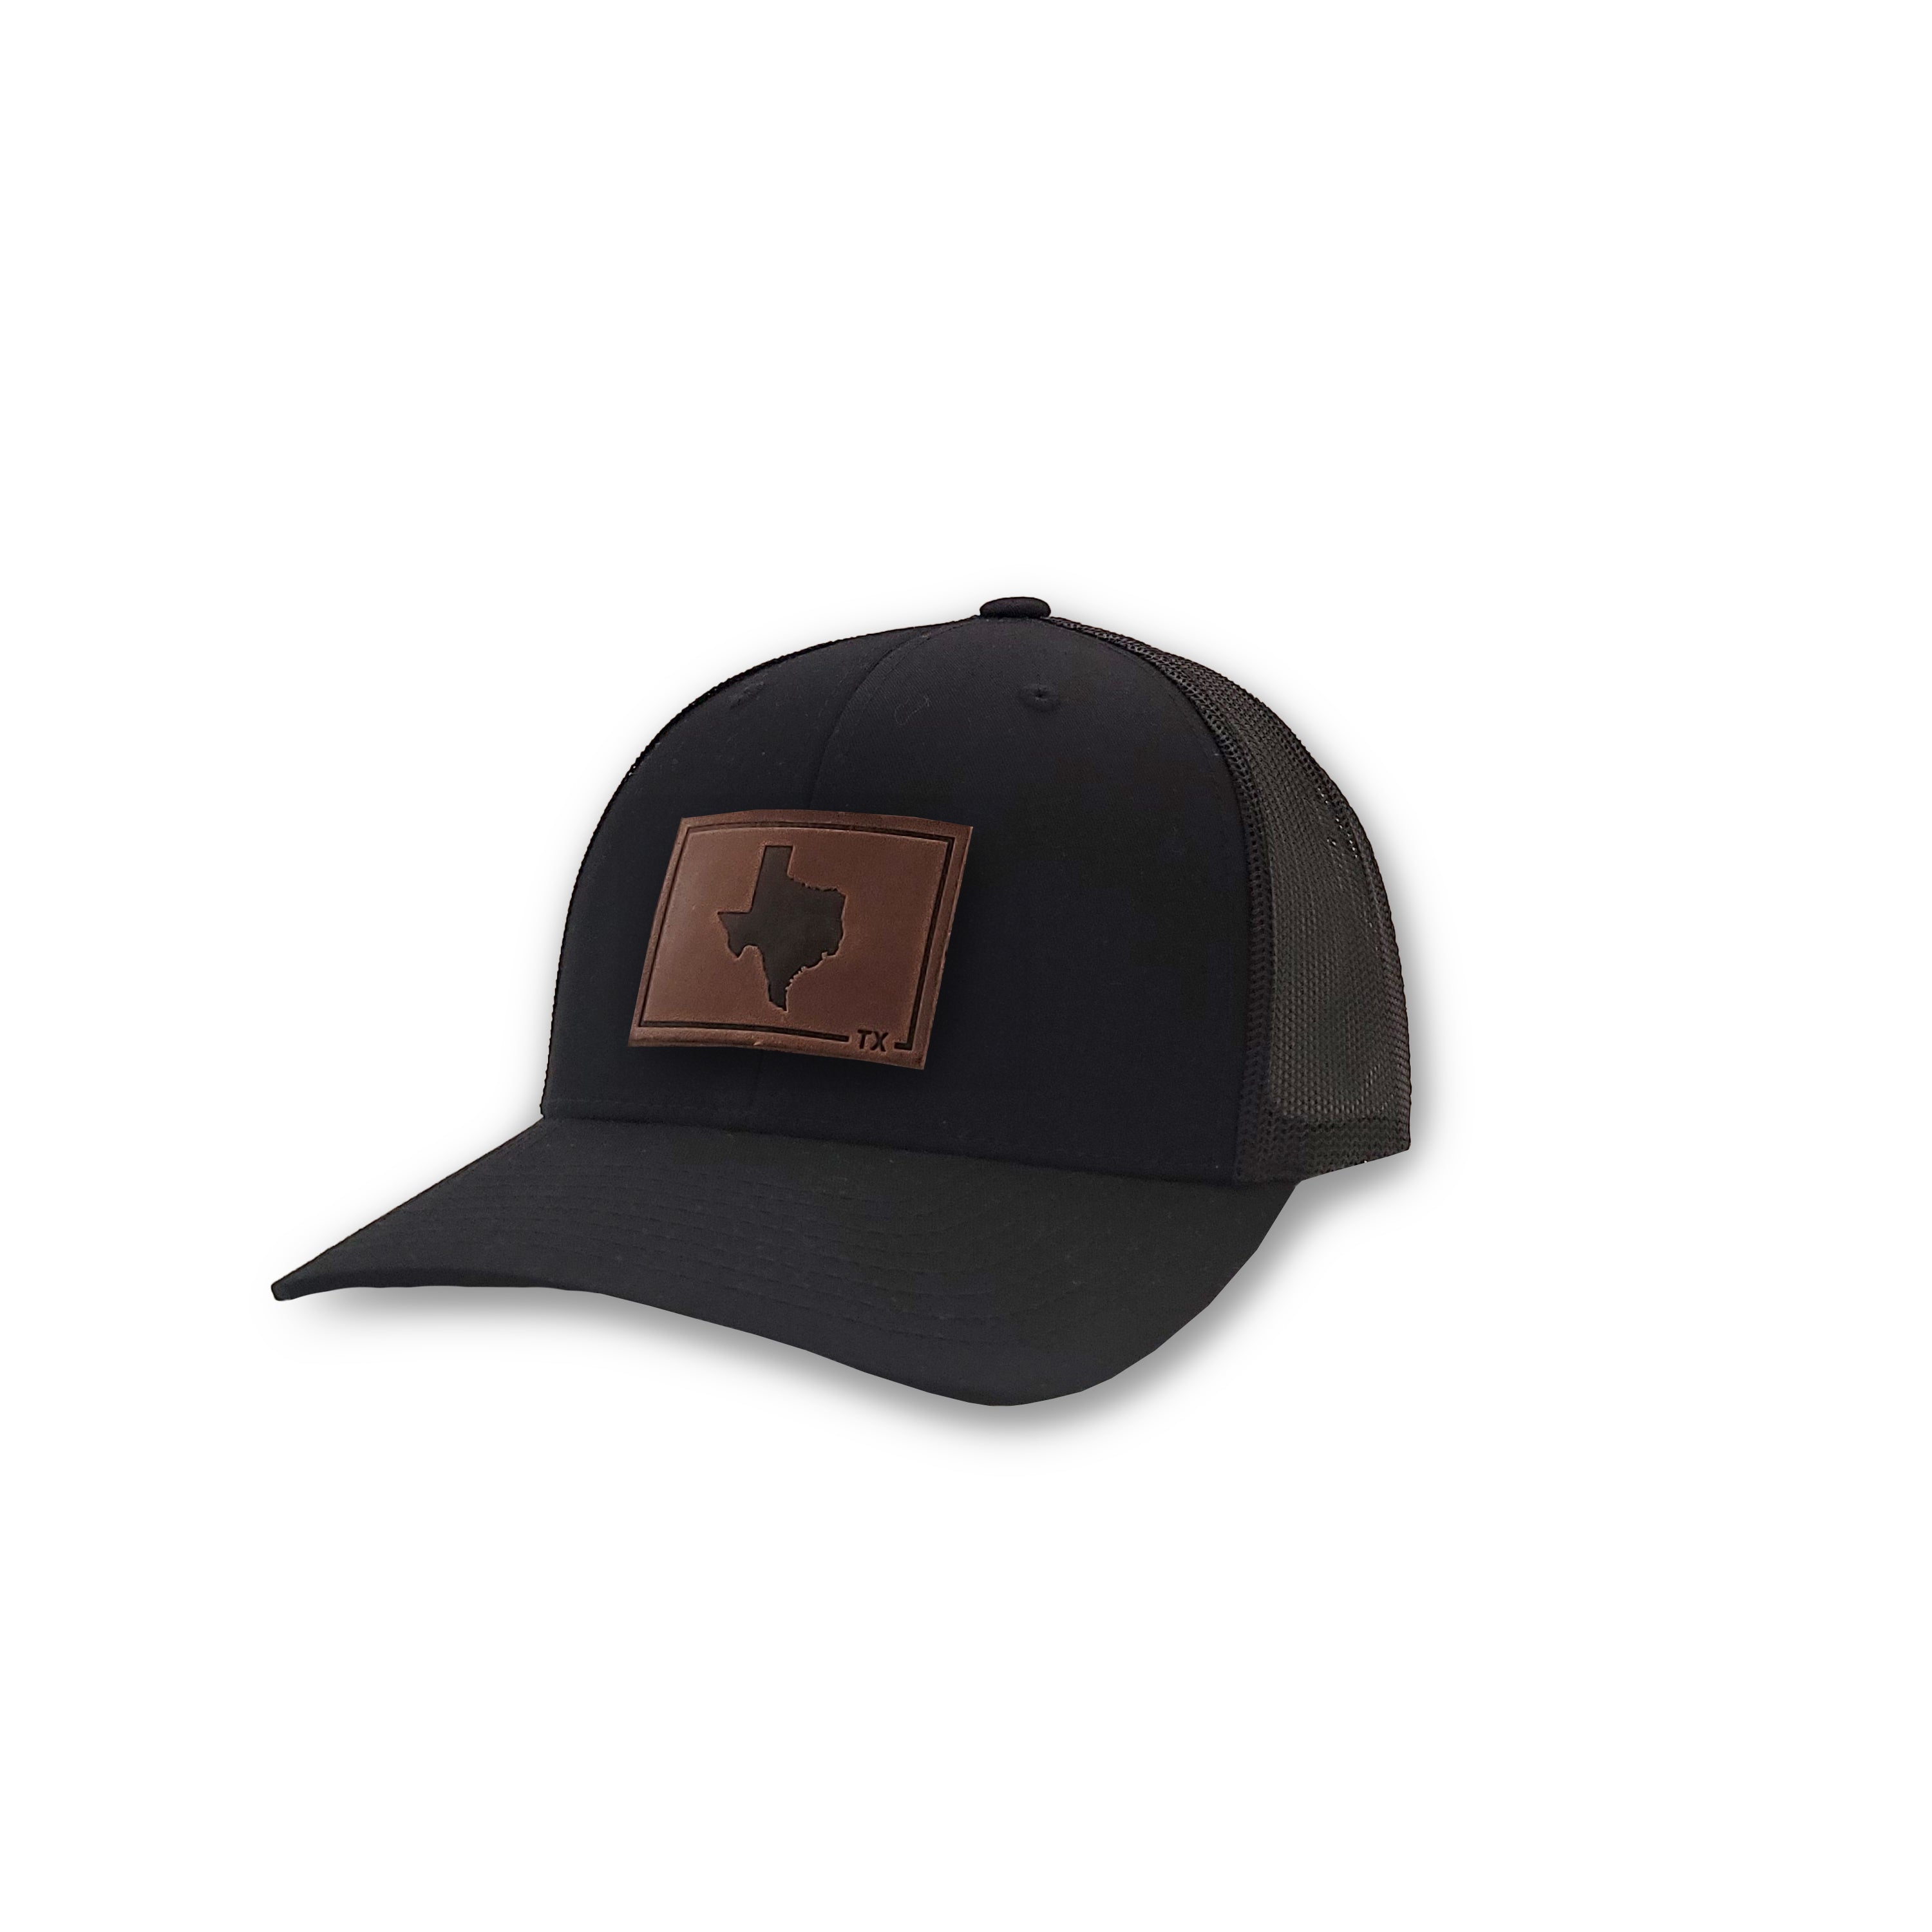 State of Texas Range Leather Patch Cap